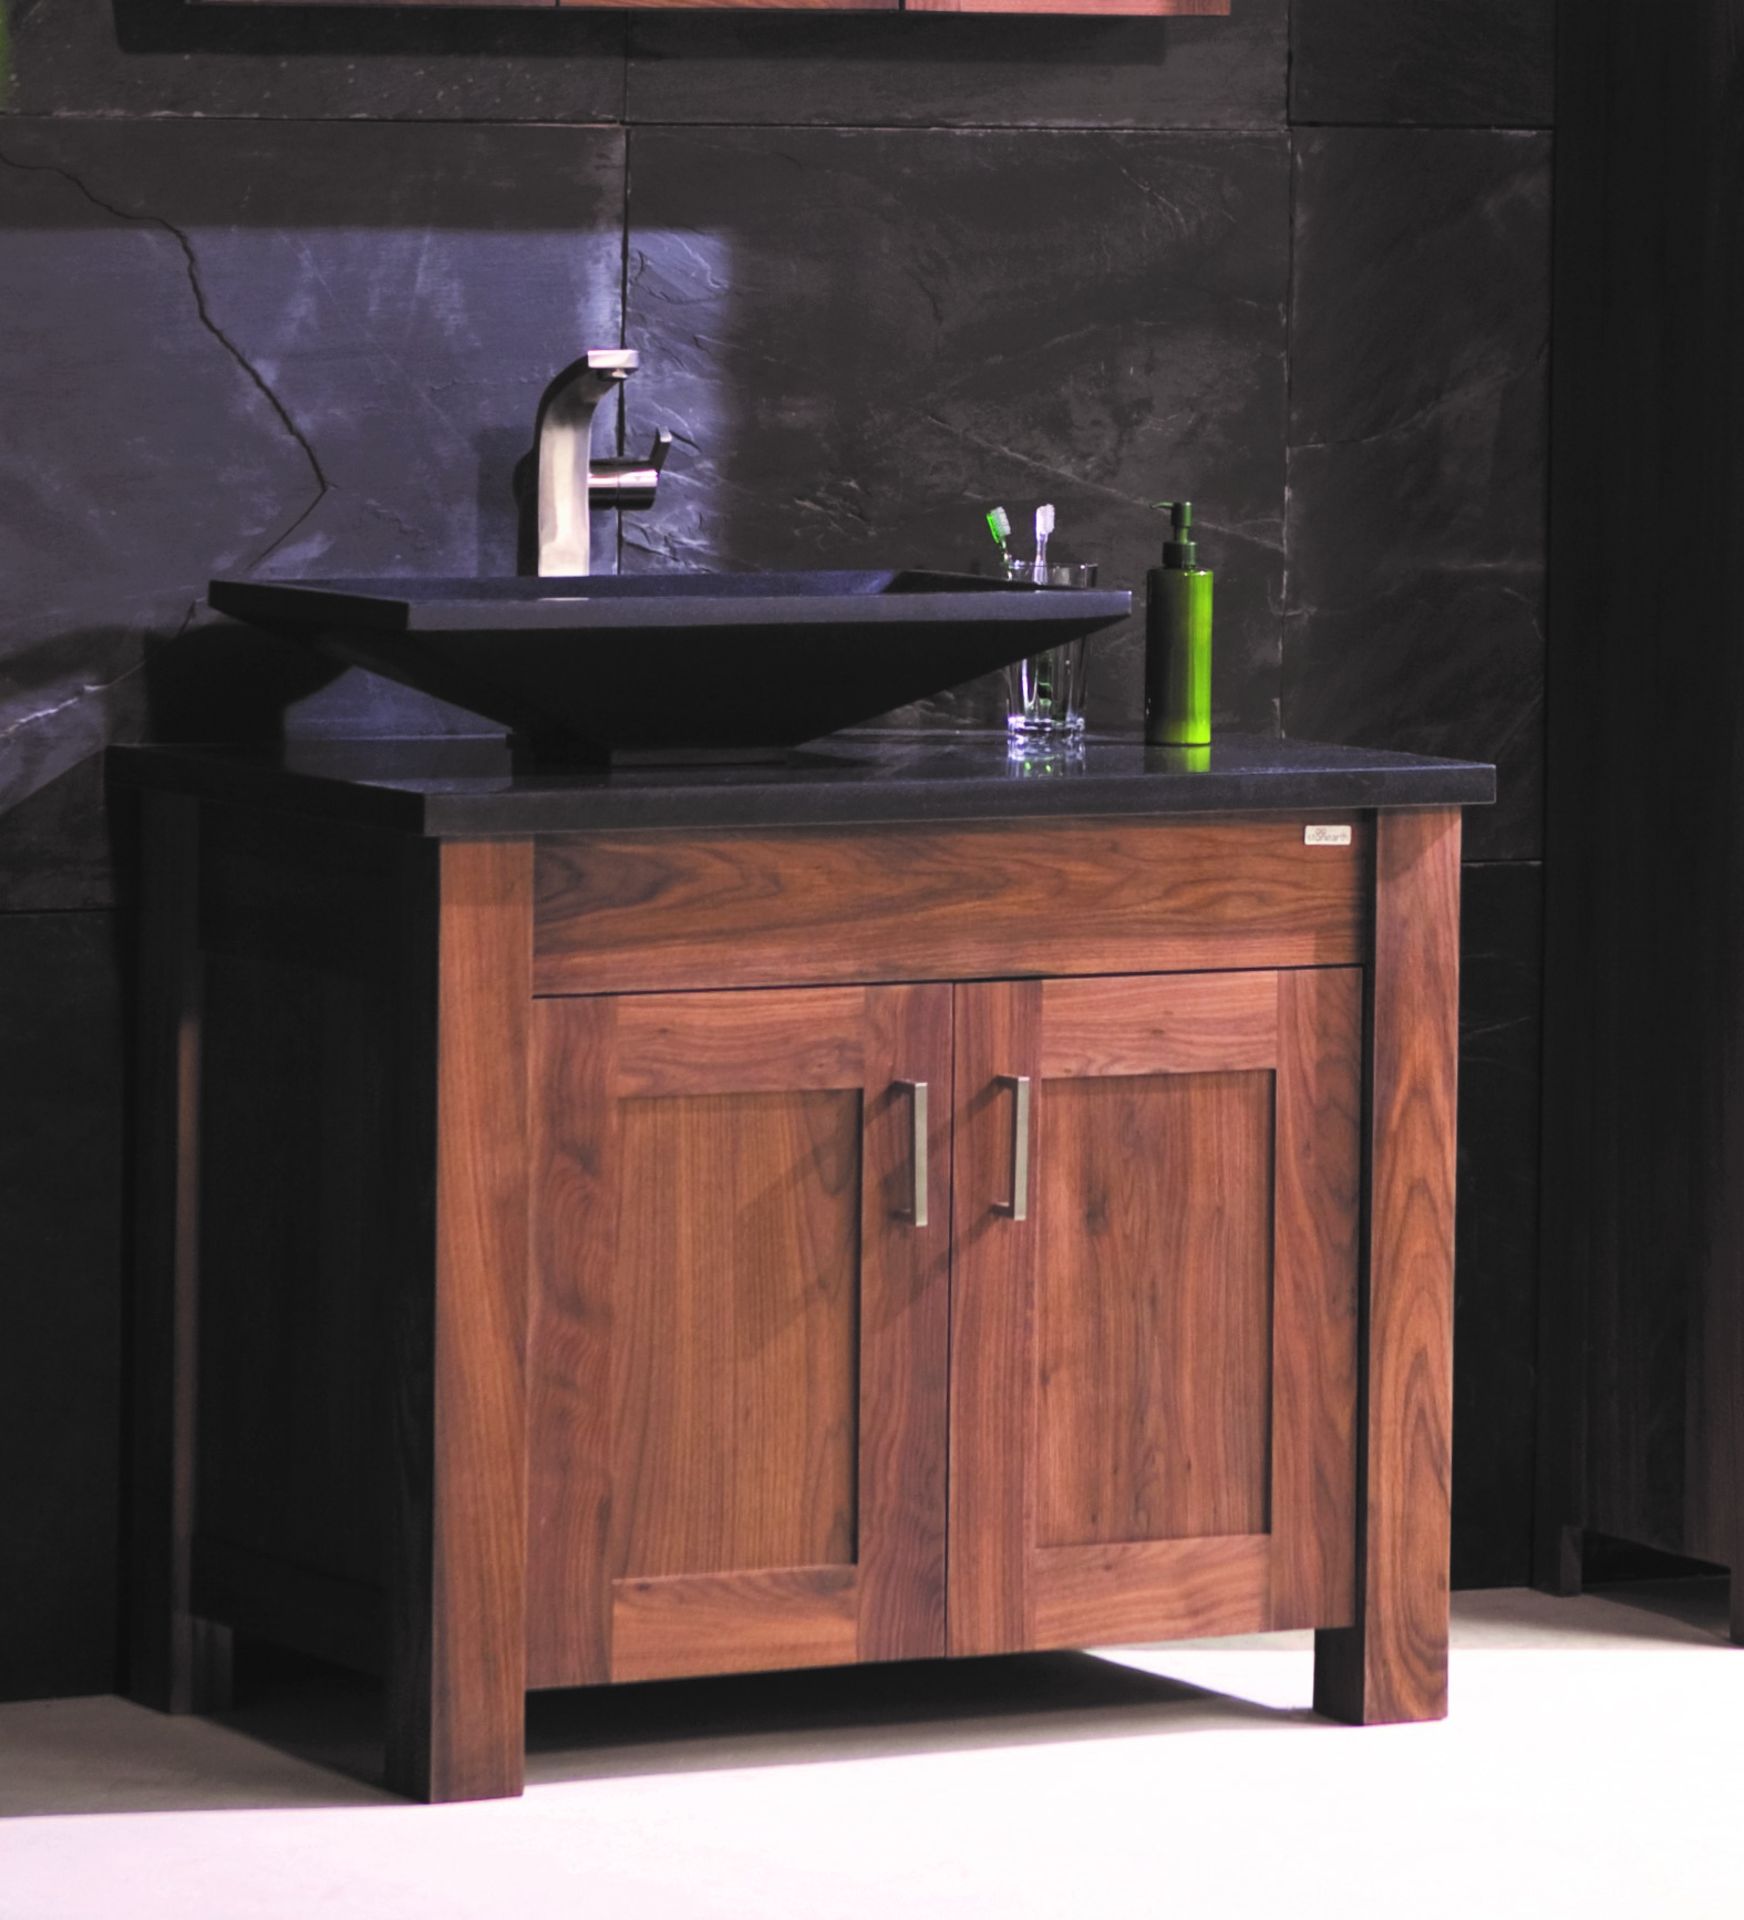 1 x Stonearth 'Finesse' Countertop Washstand - American Solid Walnut - Original RRP £1,400 - Image 2 of 12